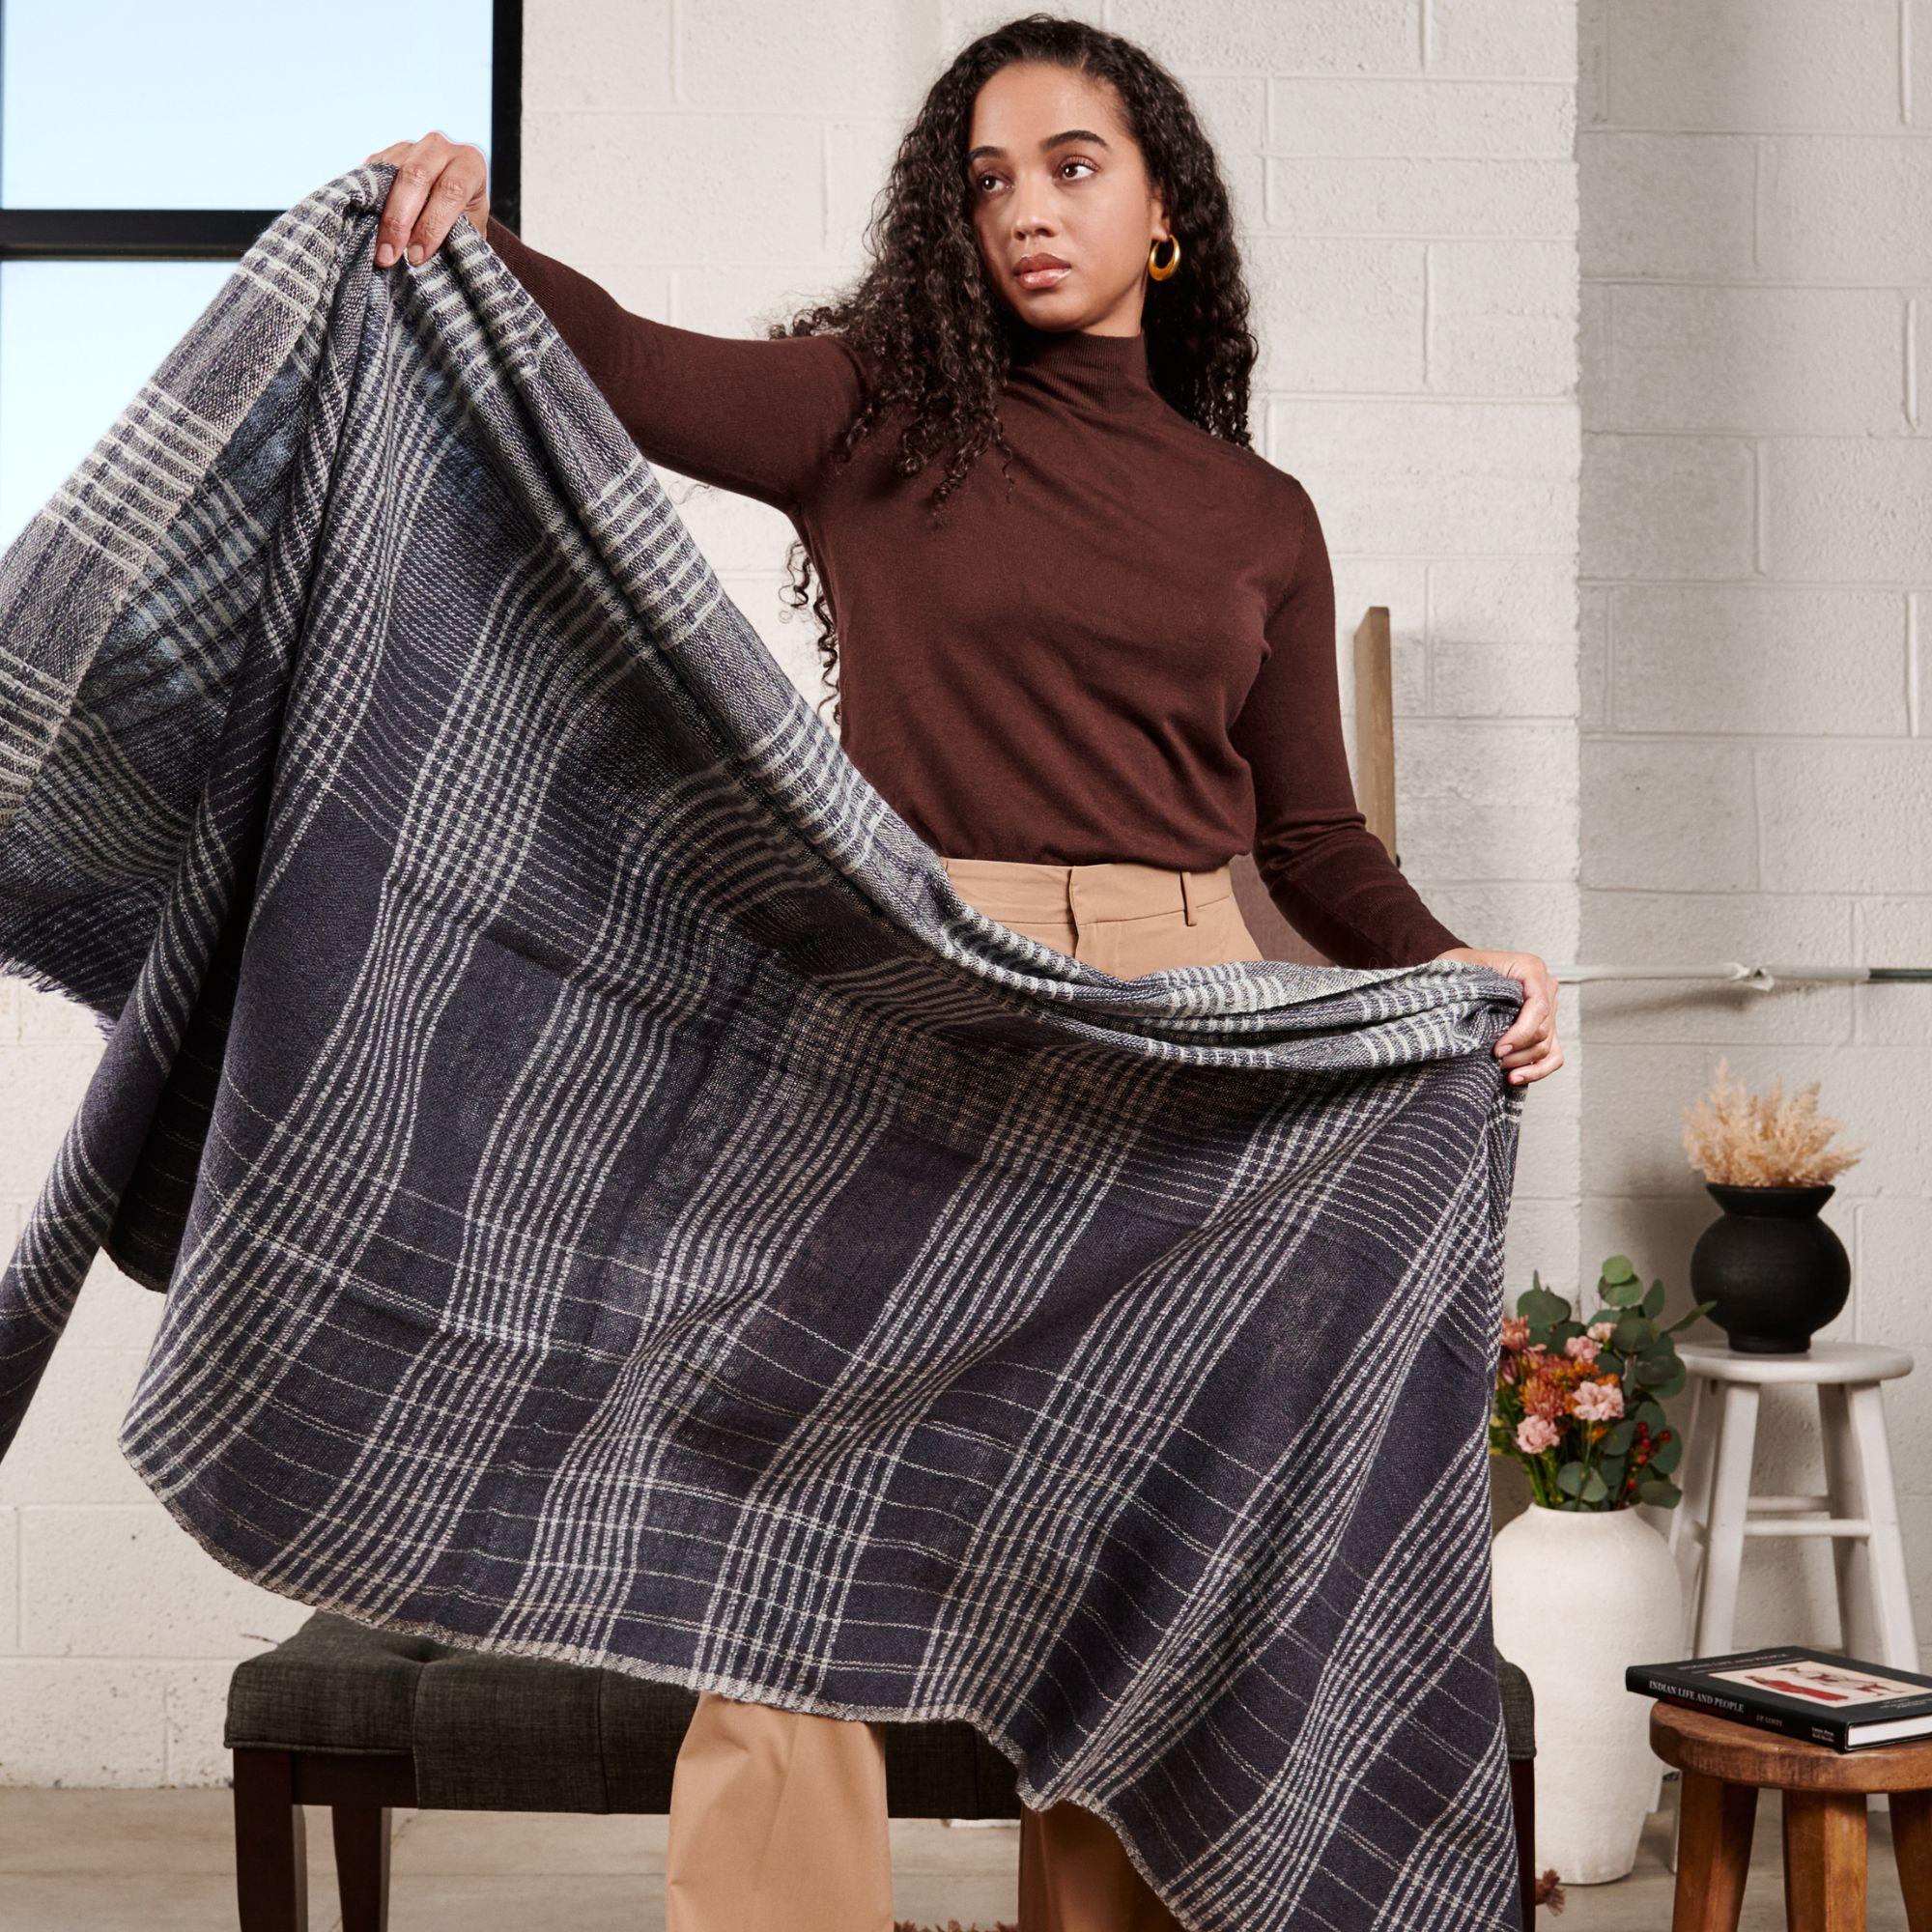 Alloy Throw is a pure modern take on combining stripes and checks pattern, classic color palette and fine detail of hand weaving done meticulously on a handwoven textile. Each piece is 100% handmade making it a unique sustainable throw which is both